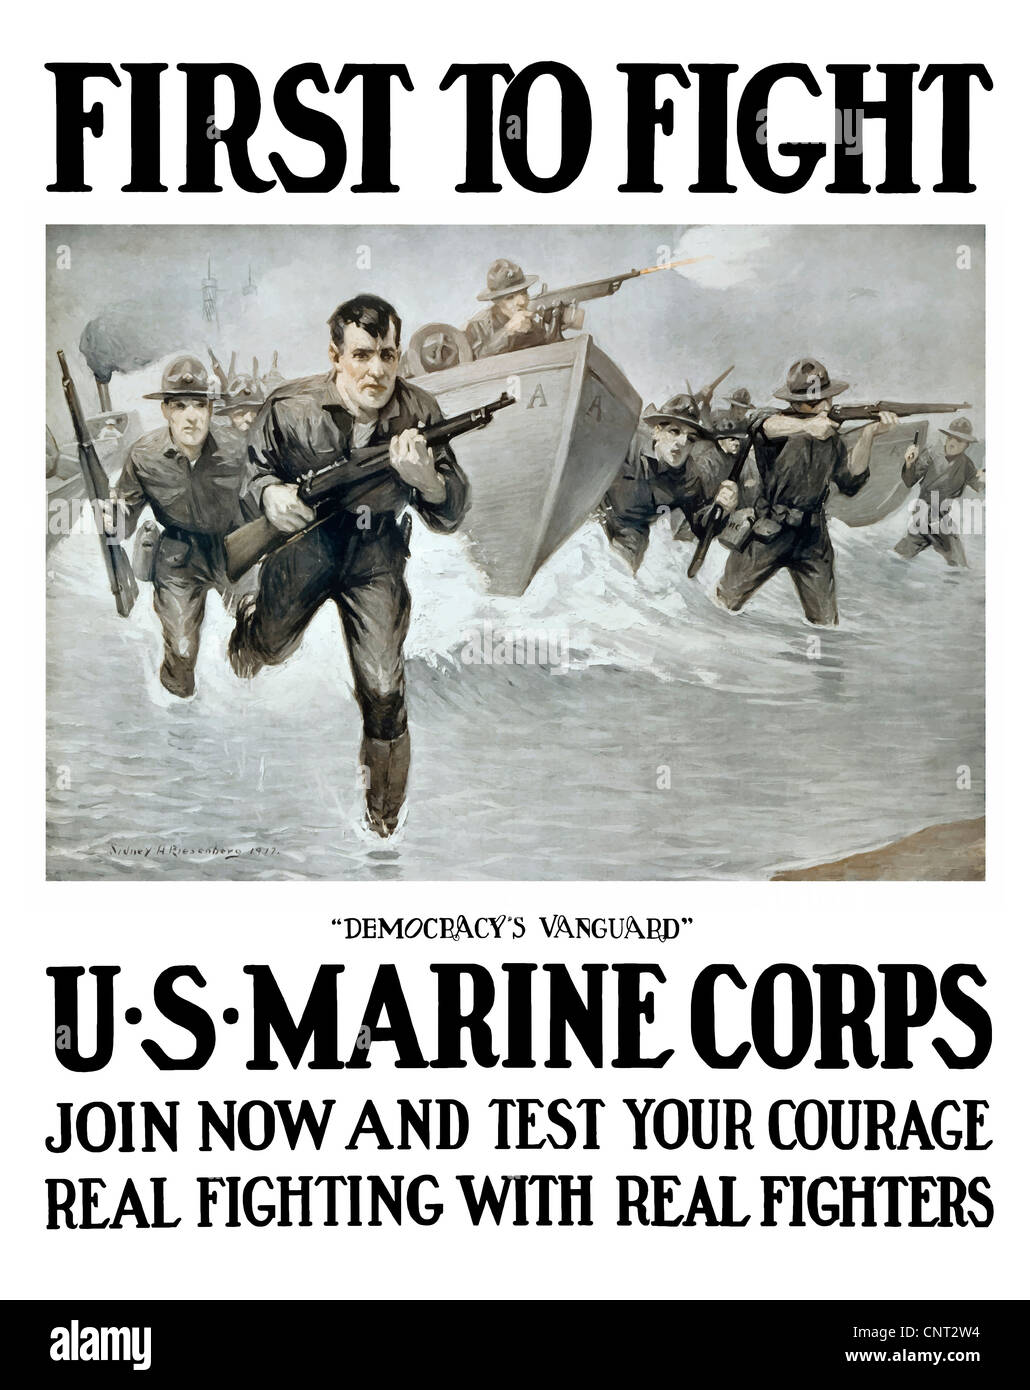 Vintage World War One poster of U.S. Marines storming a beach, rifles in hand. Stock Photo